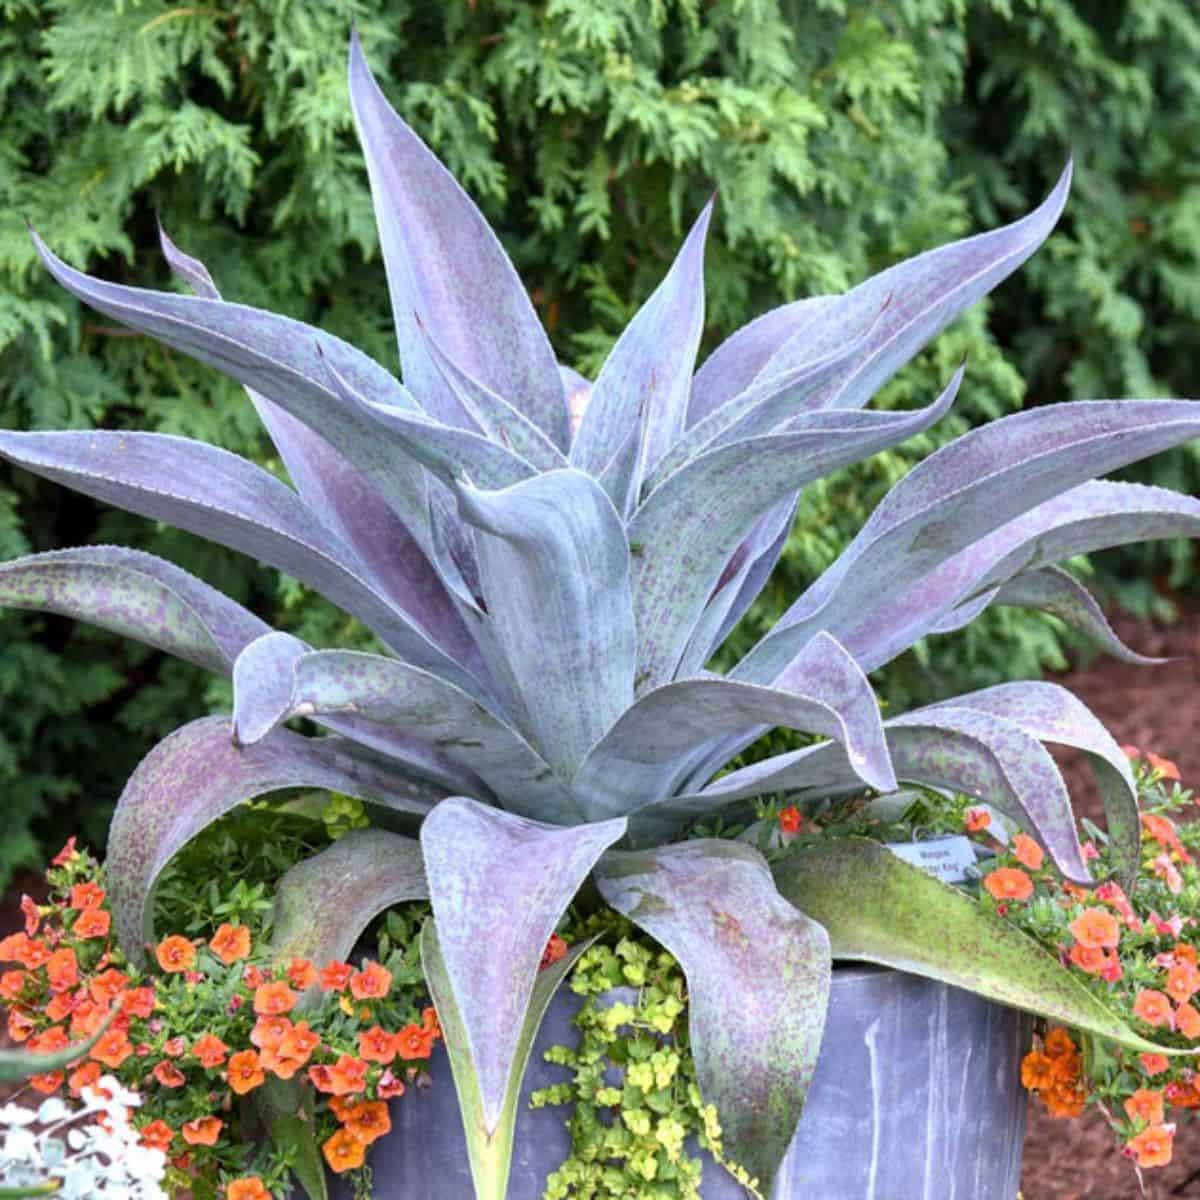 Mangave ‘Aztec King’ in a pot.